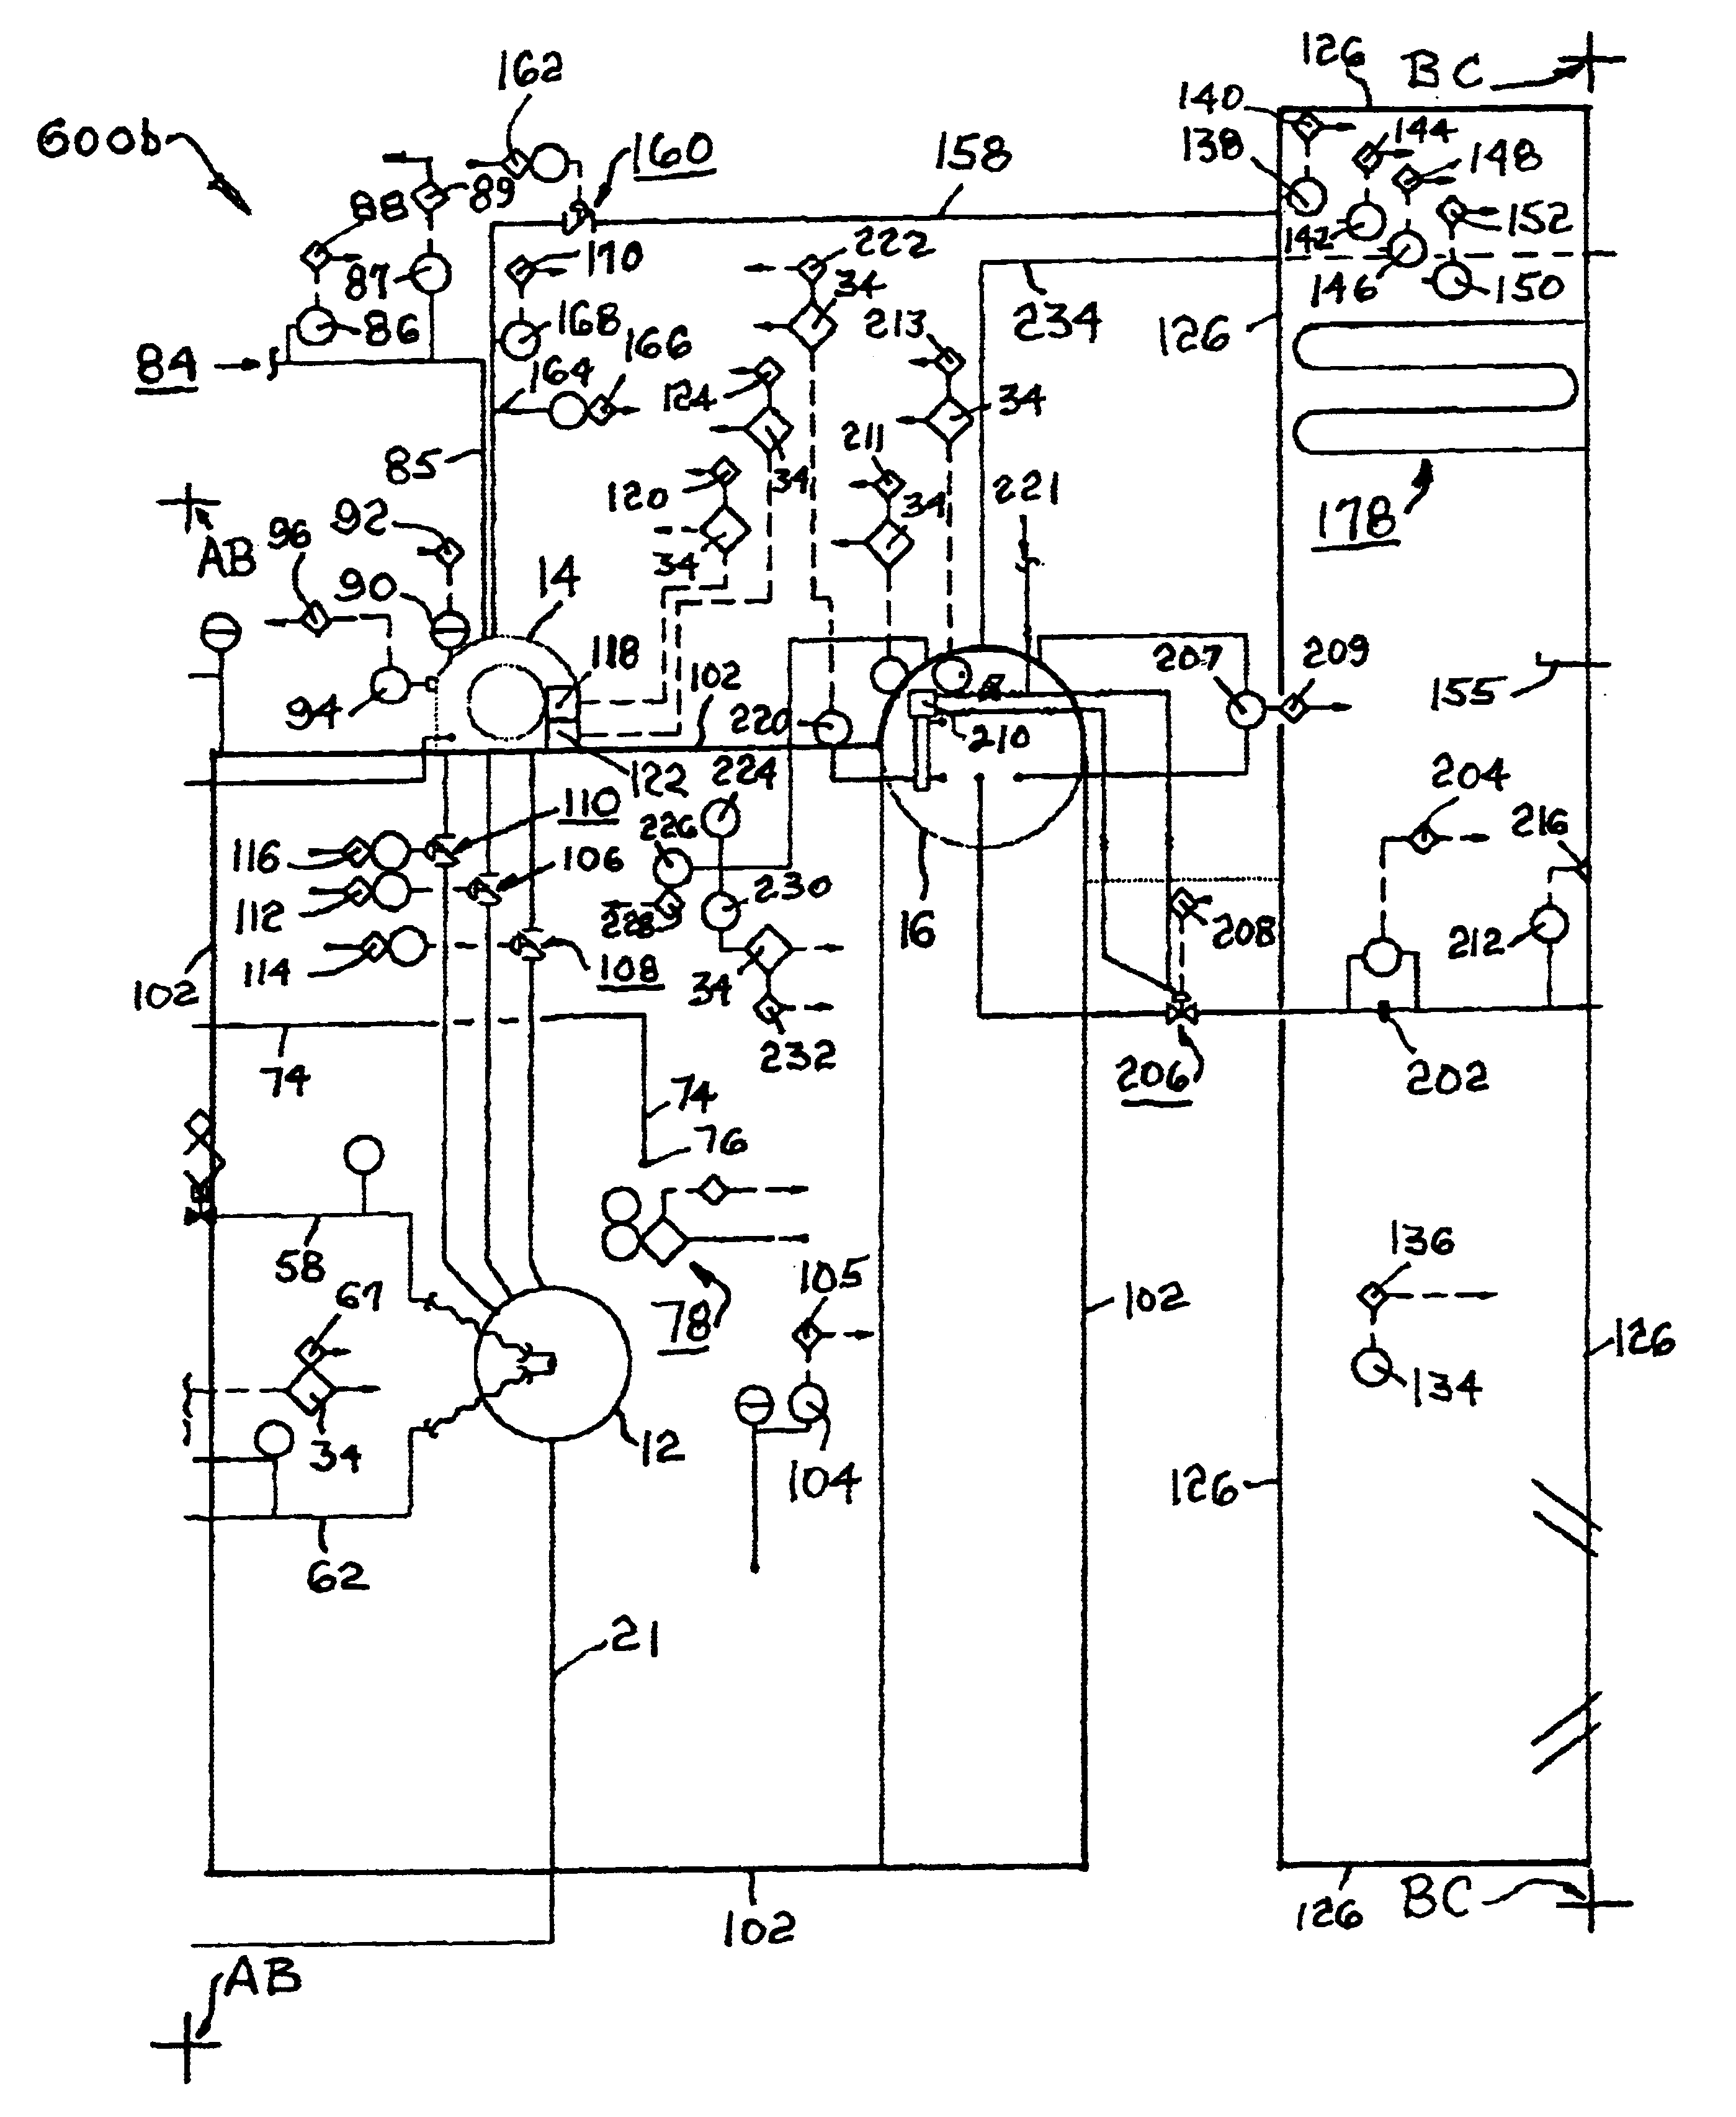 Method and apparatus for optimizing a steam boiler system